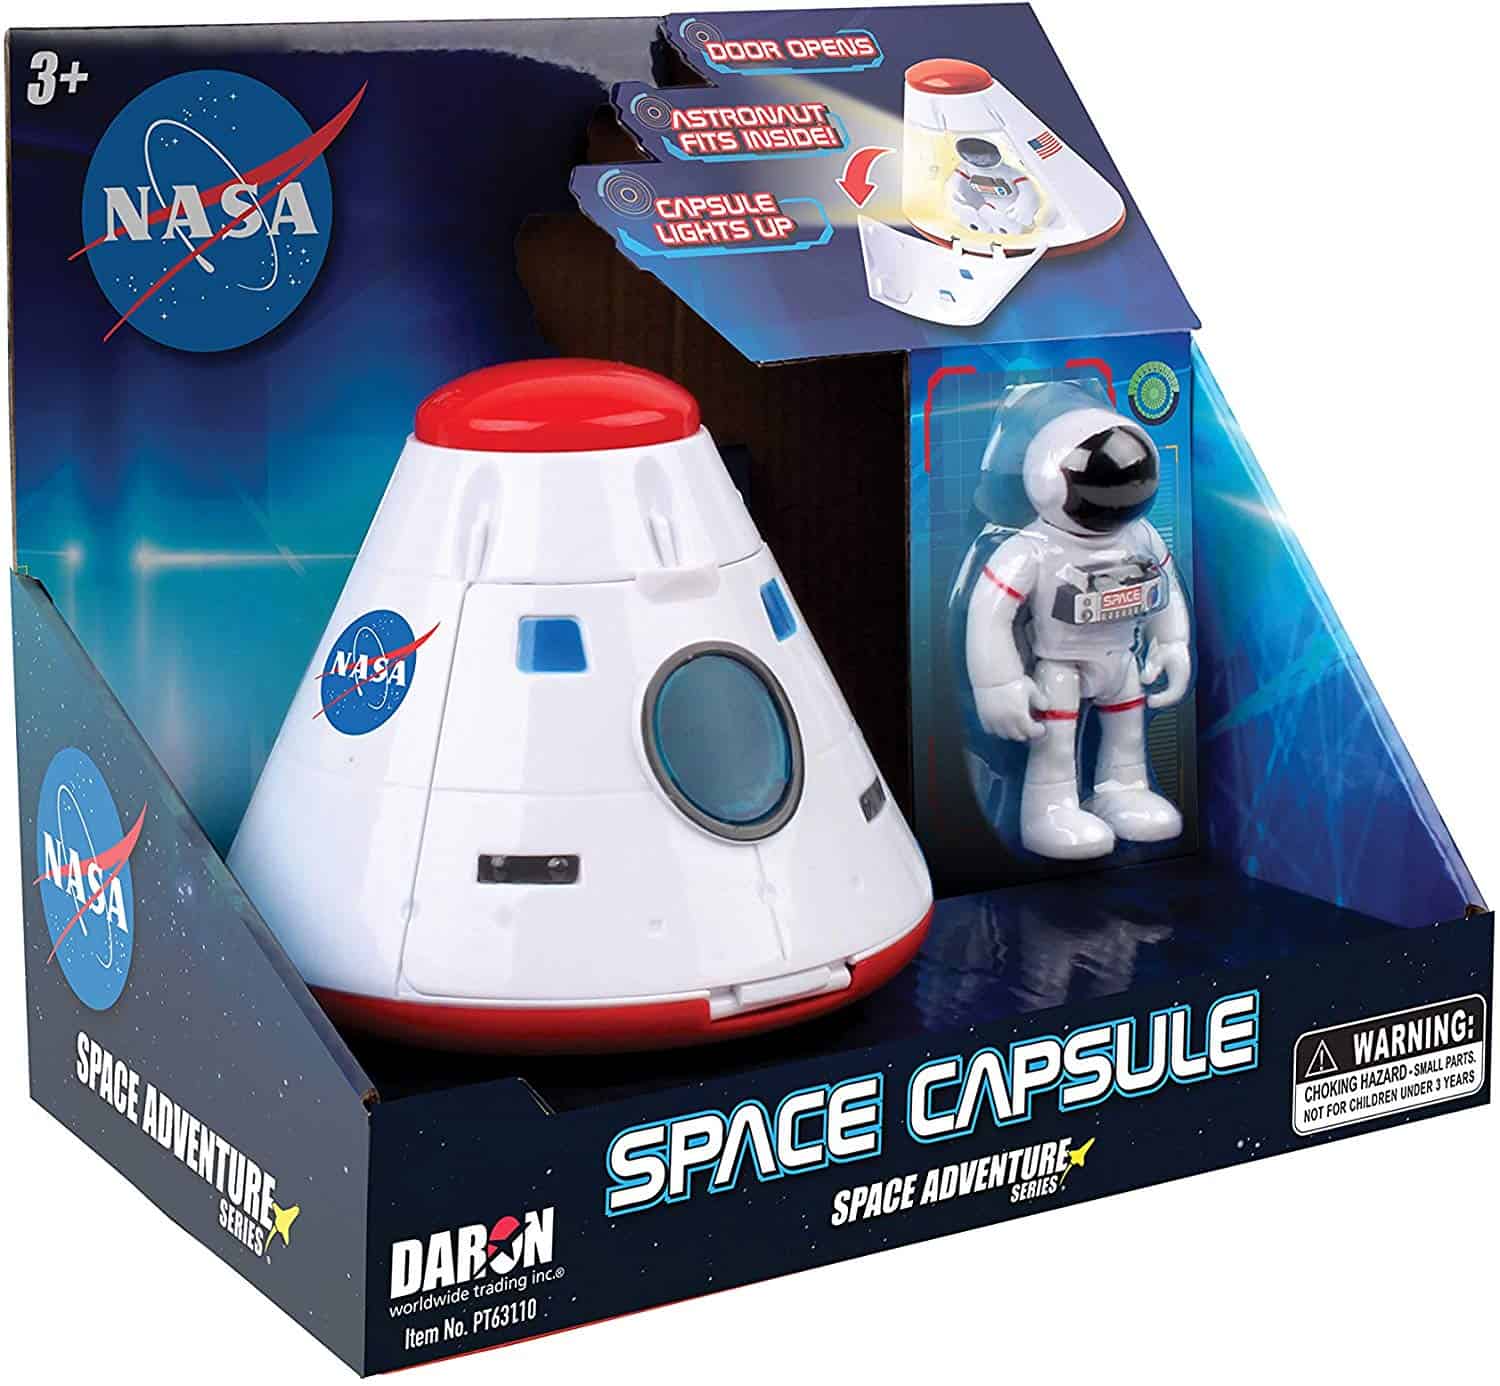 4M Cosmic Rocket Kit Ts3433 Learning Playset for sale online 